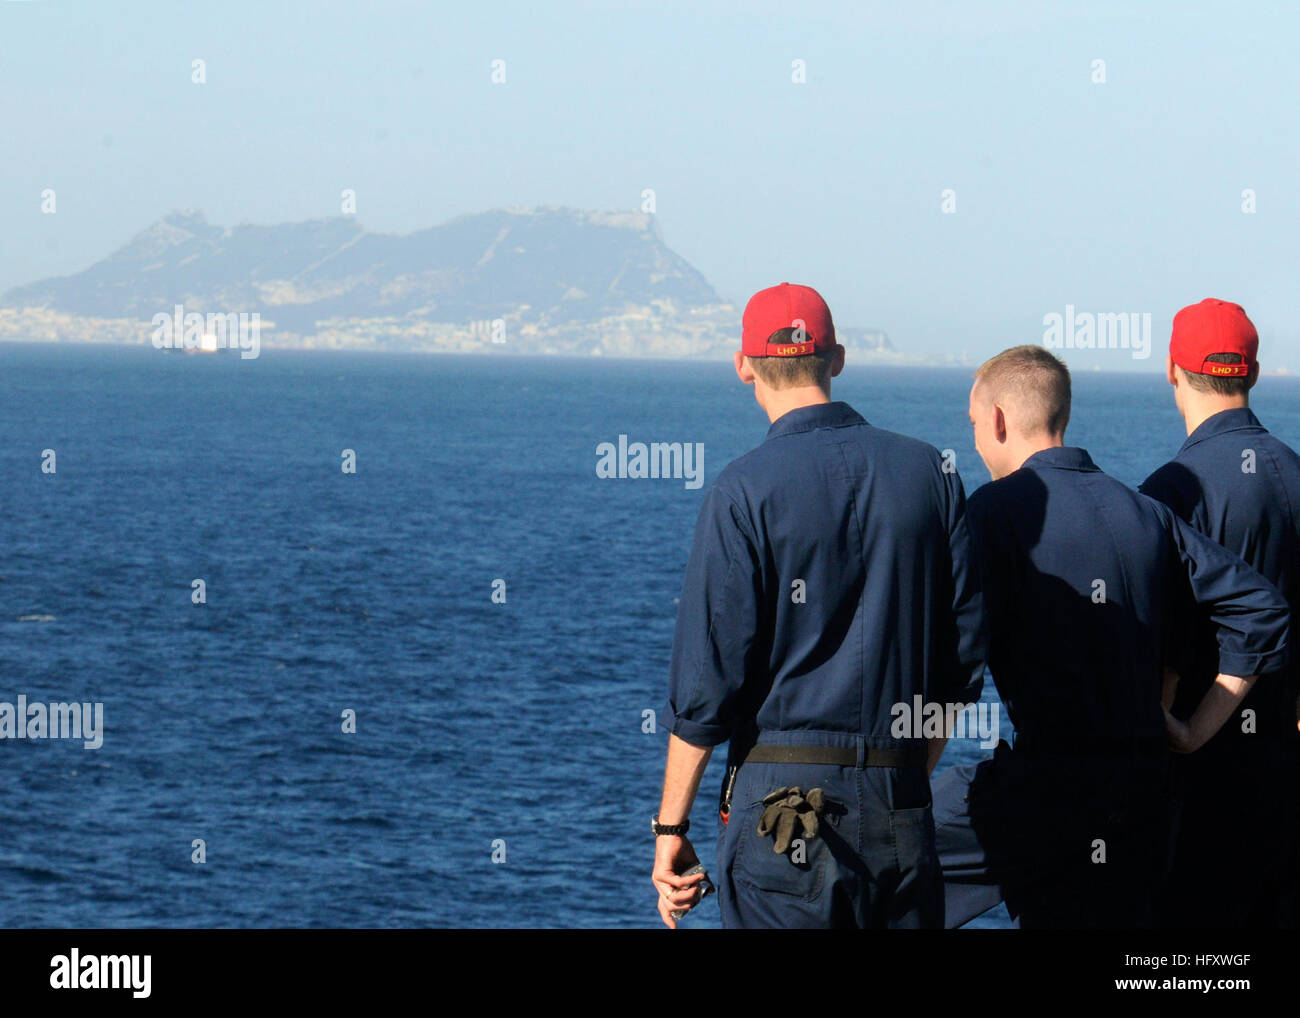 100908-N-3154P-001 GIBRALTAR (Sept. 8, 2010) Sailors aboard the amphibious assault ship USS Kearsarge (LHD 3) observe the rock of Gibraltar as the ship transits the Strait of Gibraltar. The Kearsarge Amphibious Ready Group (ARG) is en route to Pakistan to help provide relief to flood-stricken regions. (U.S. Navy photo by Mass Communication Specialist 3rd Class Scott Pittman/Released) US Navy 100908-N-3154P-001 Sailors aboard USS Kearsarge (LHD 3) observe the rock of Gibraltar as the ship transits the Strait of Gibraltar Stock Photo